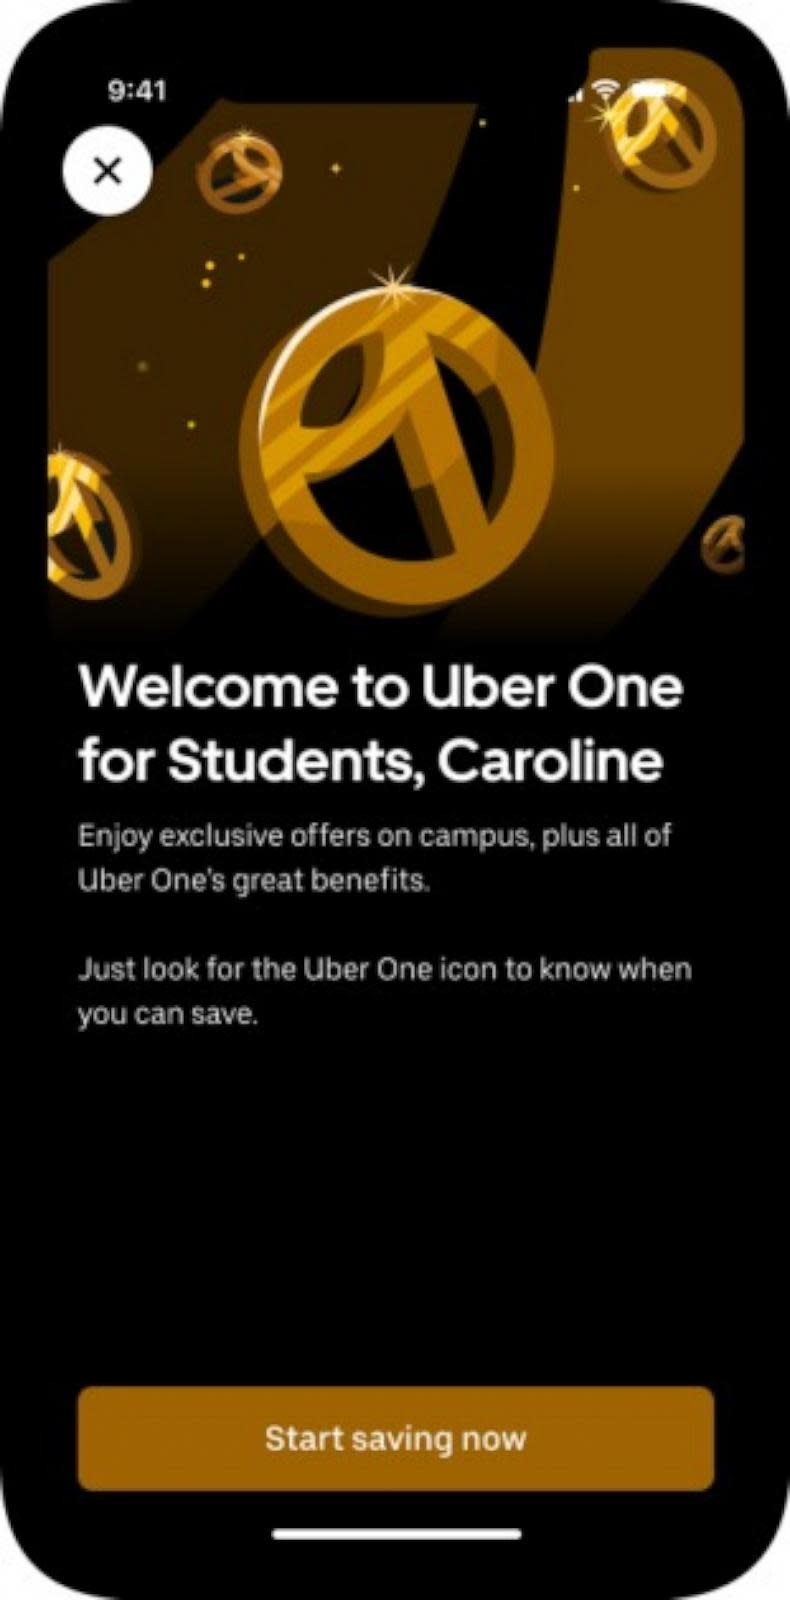 PHOTO: Uber One for students is just $4.99 per month or $48 per year. (Uber Shuttle)